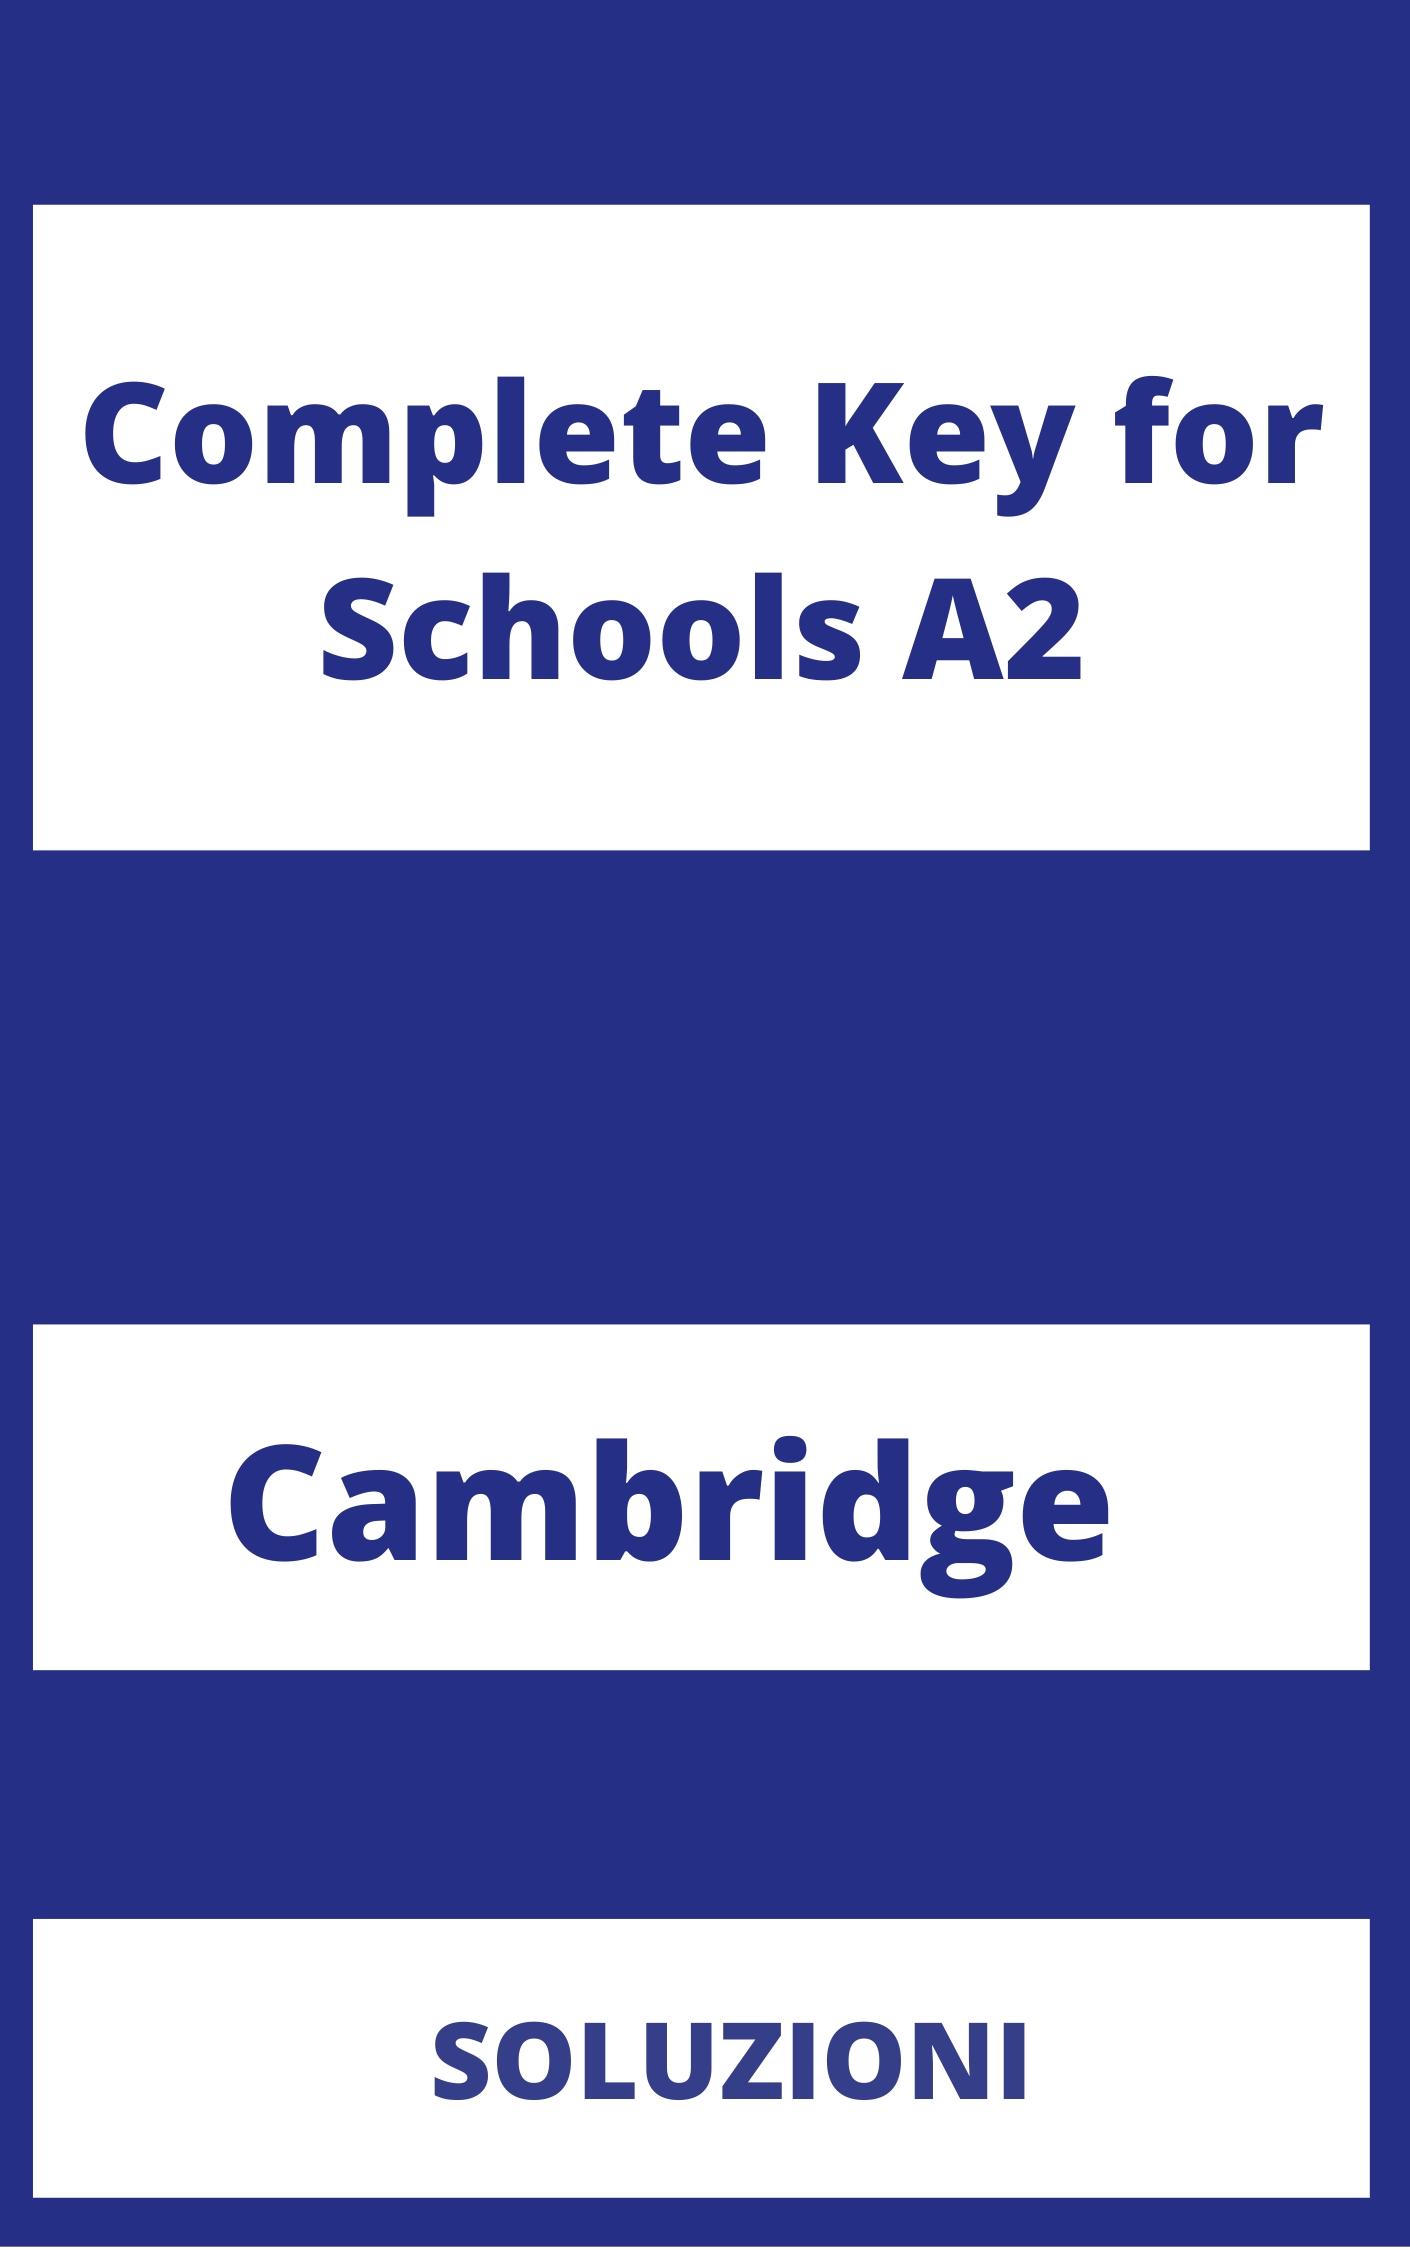 Complete Key for Schools A2